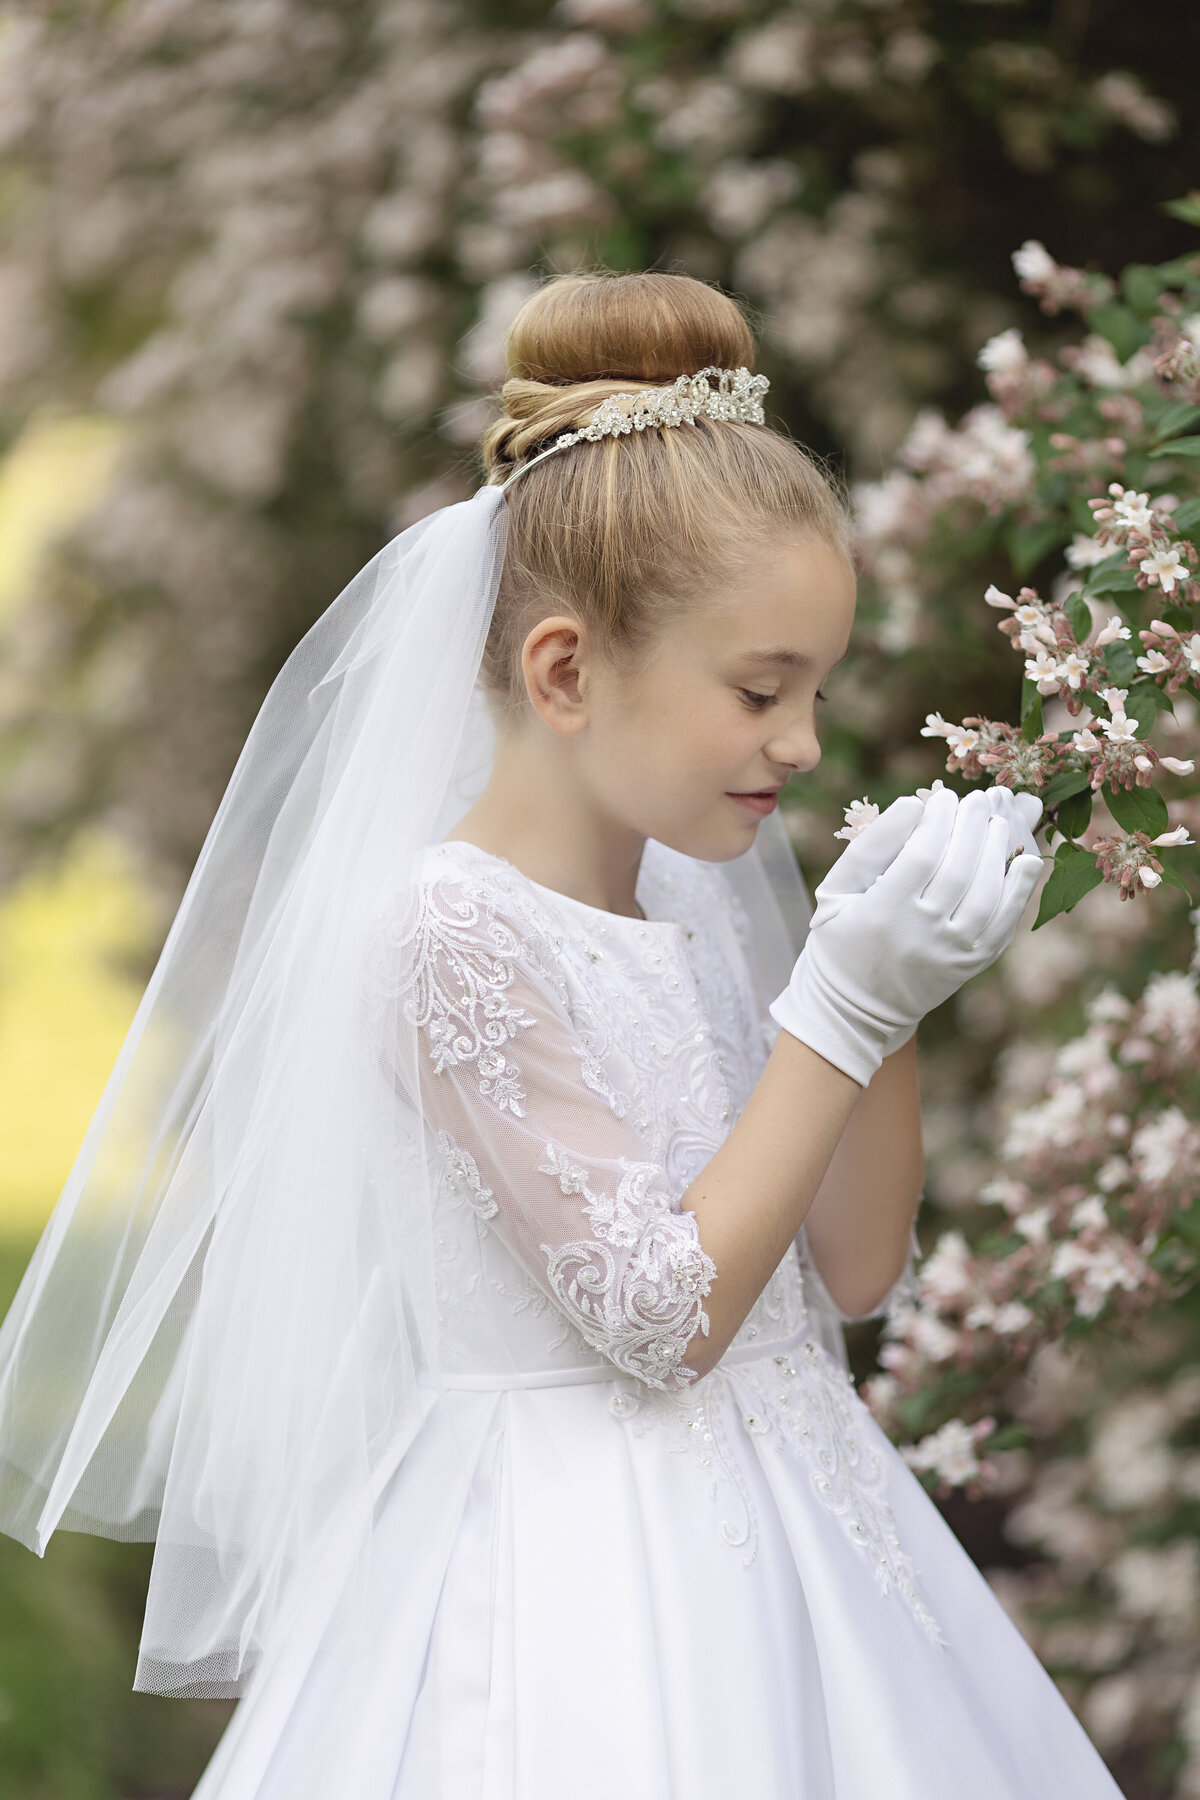 A young girl in a white communion dress and white gloves smells some flowers in a garden